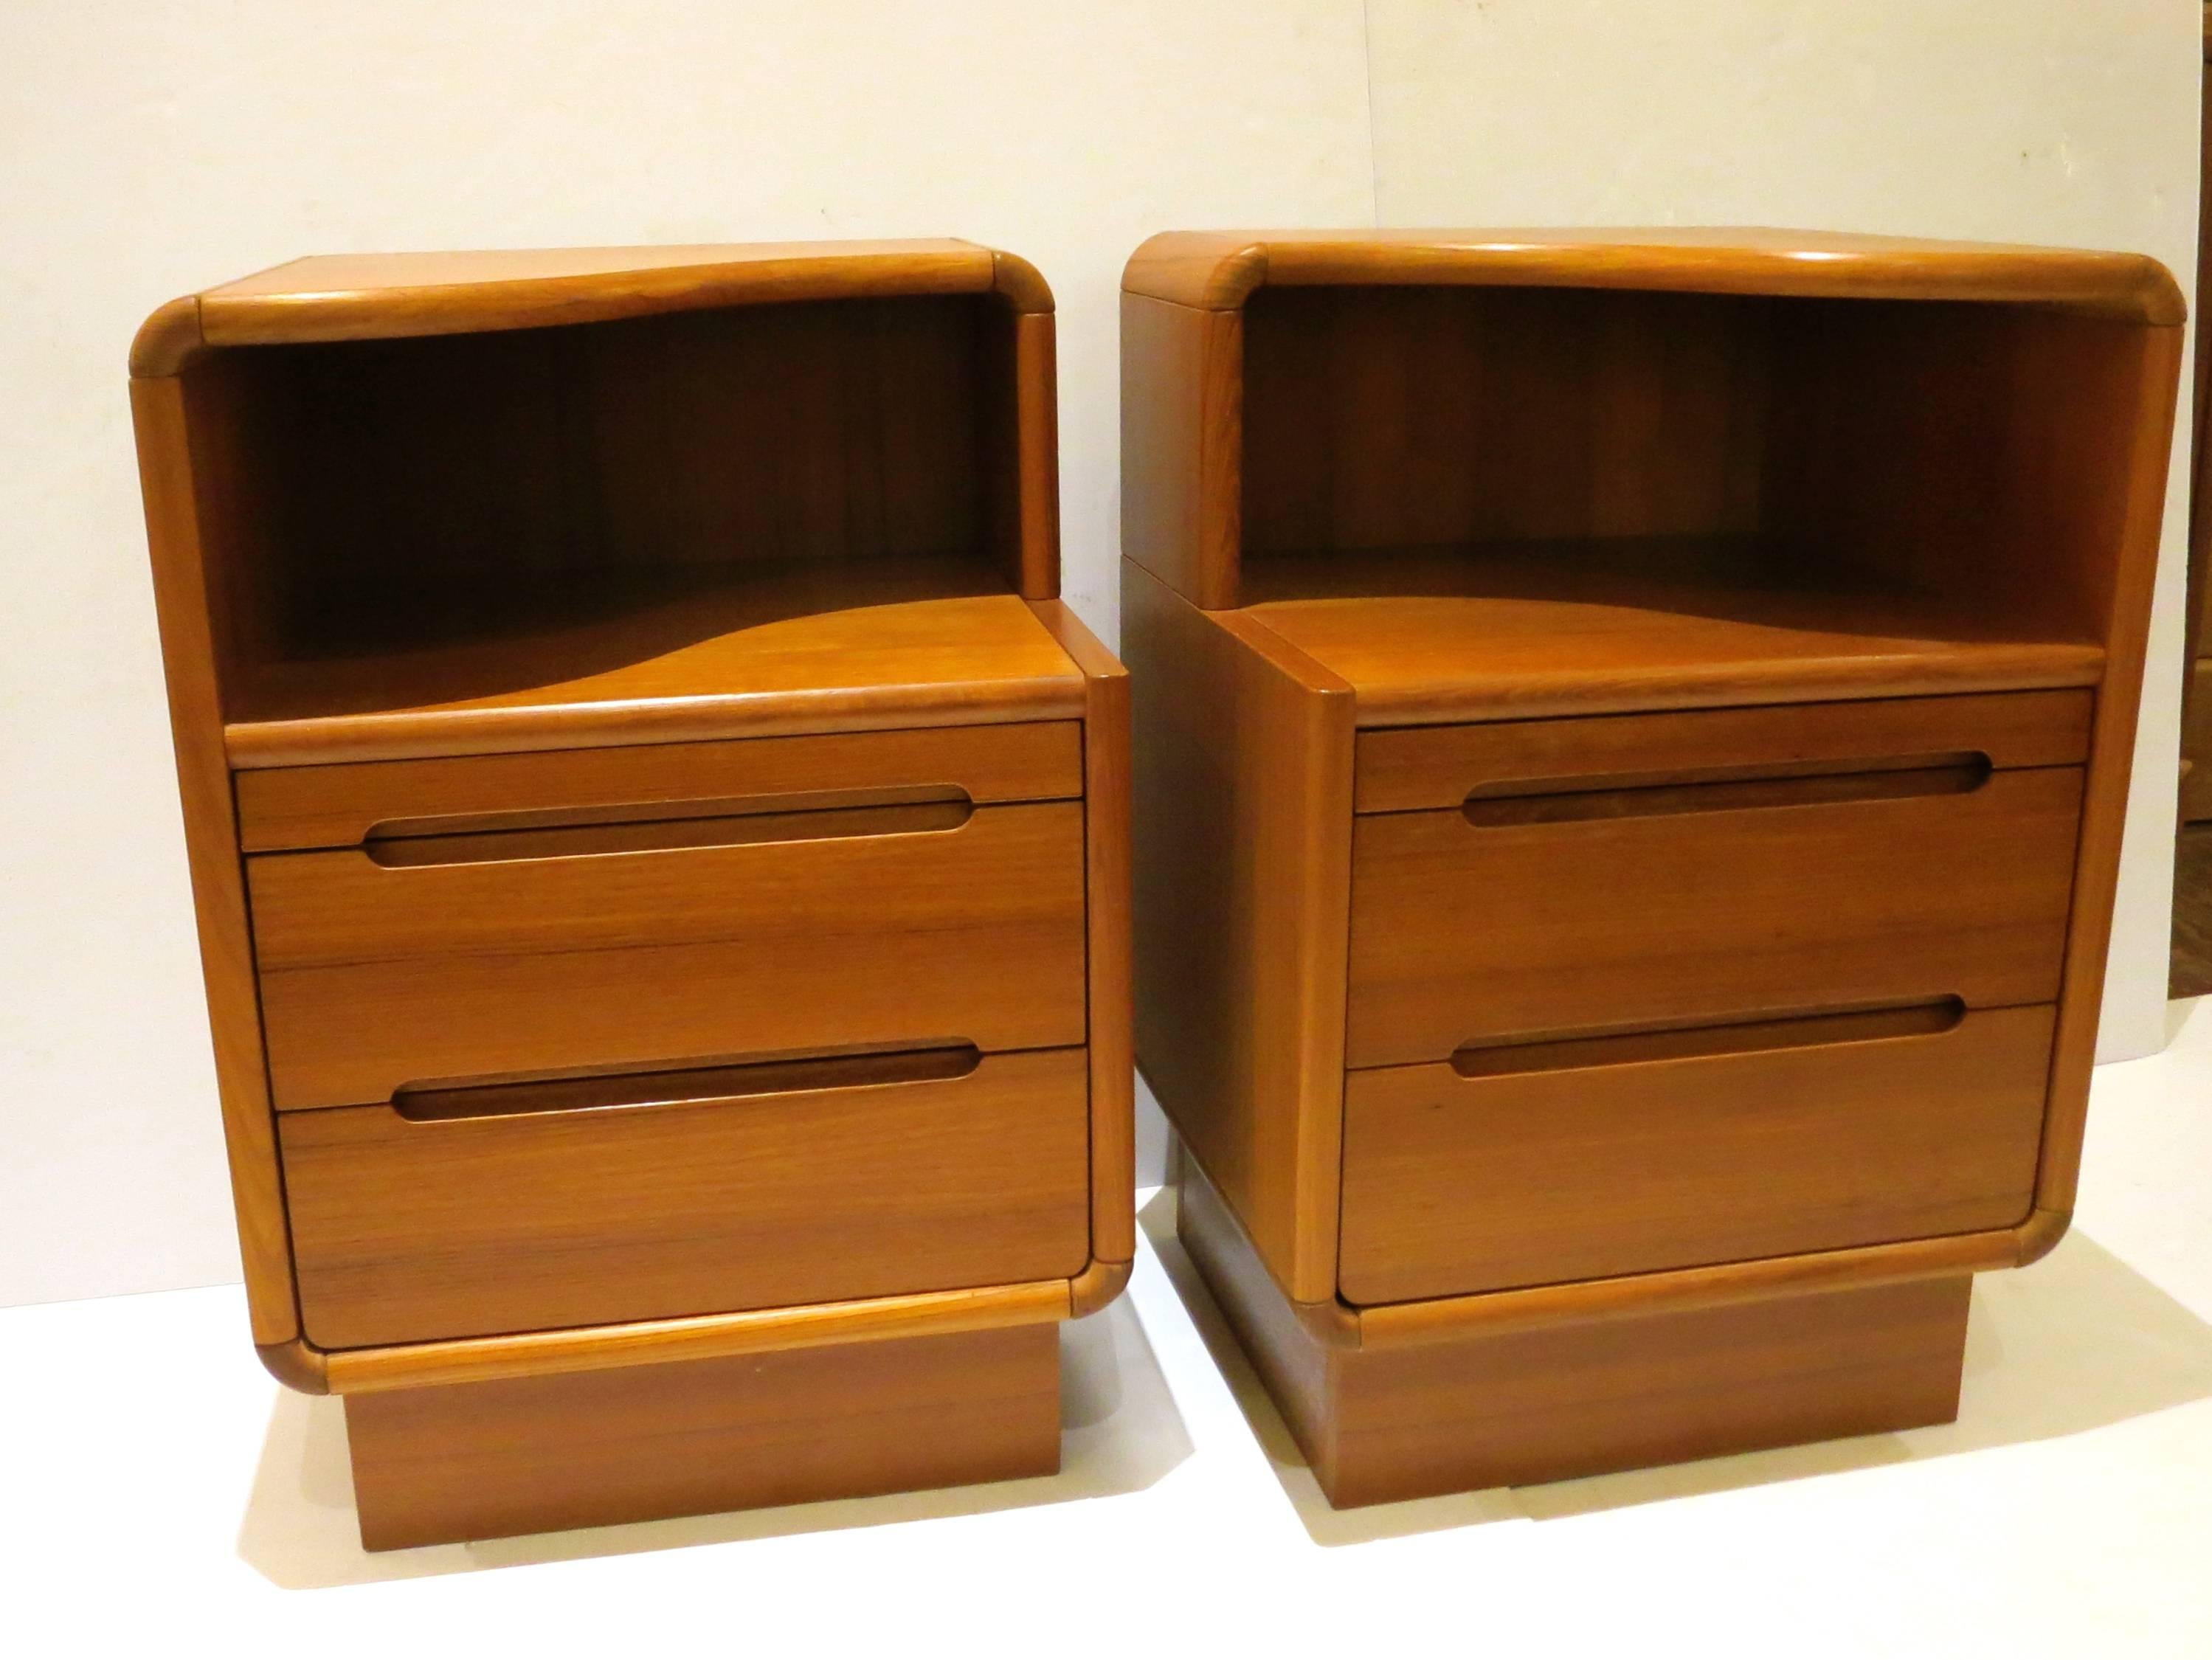 Nice pair of teak nightstands, the solid edging and rounded solid teak corners, two drawers and a pull writing table, nice metal gliders, circa 1980s great condition, refinished in the back, nice organic top.